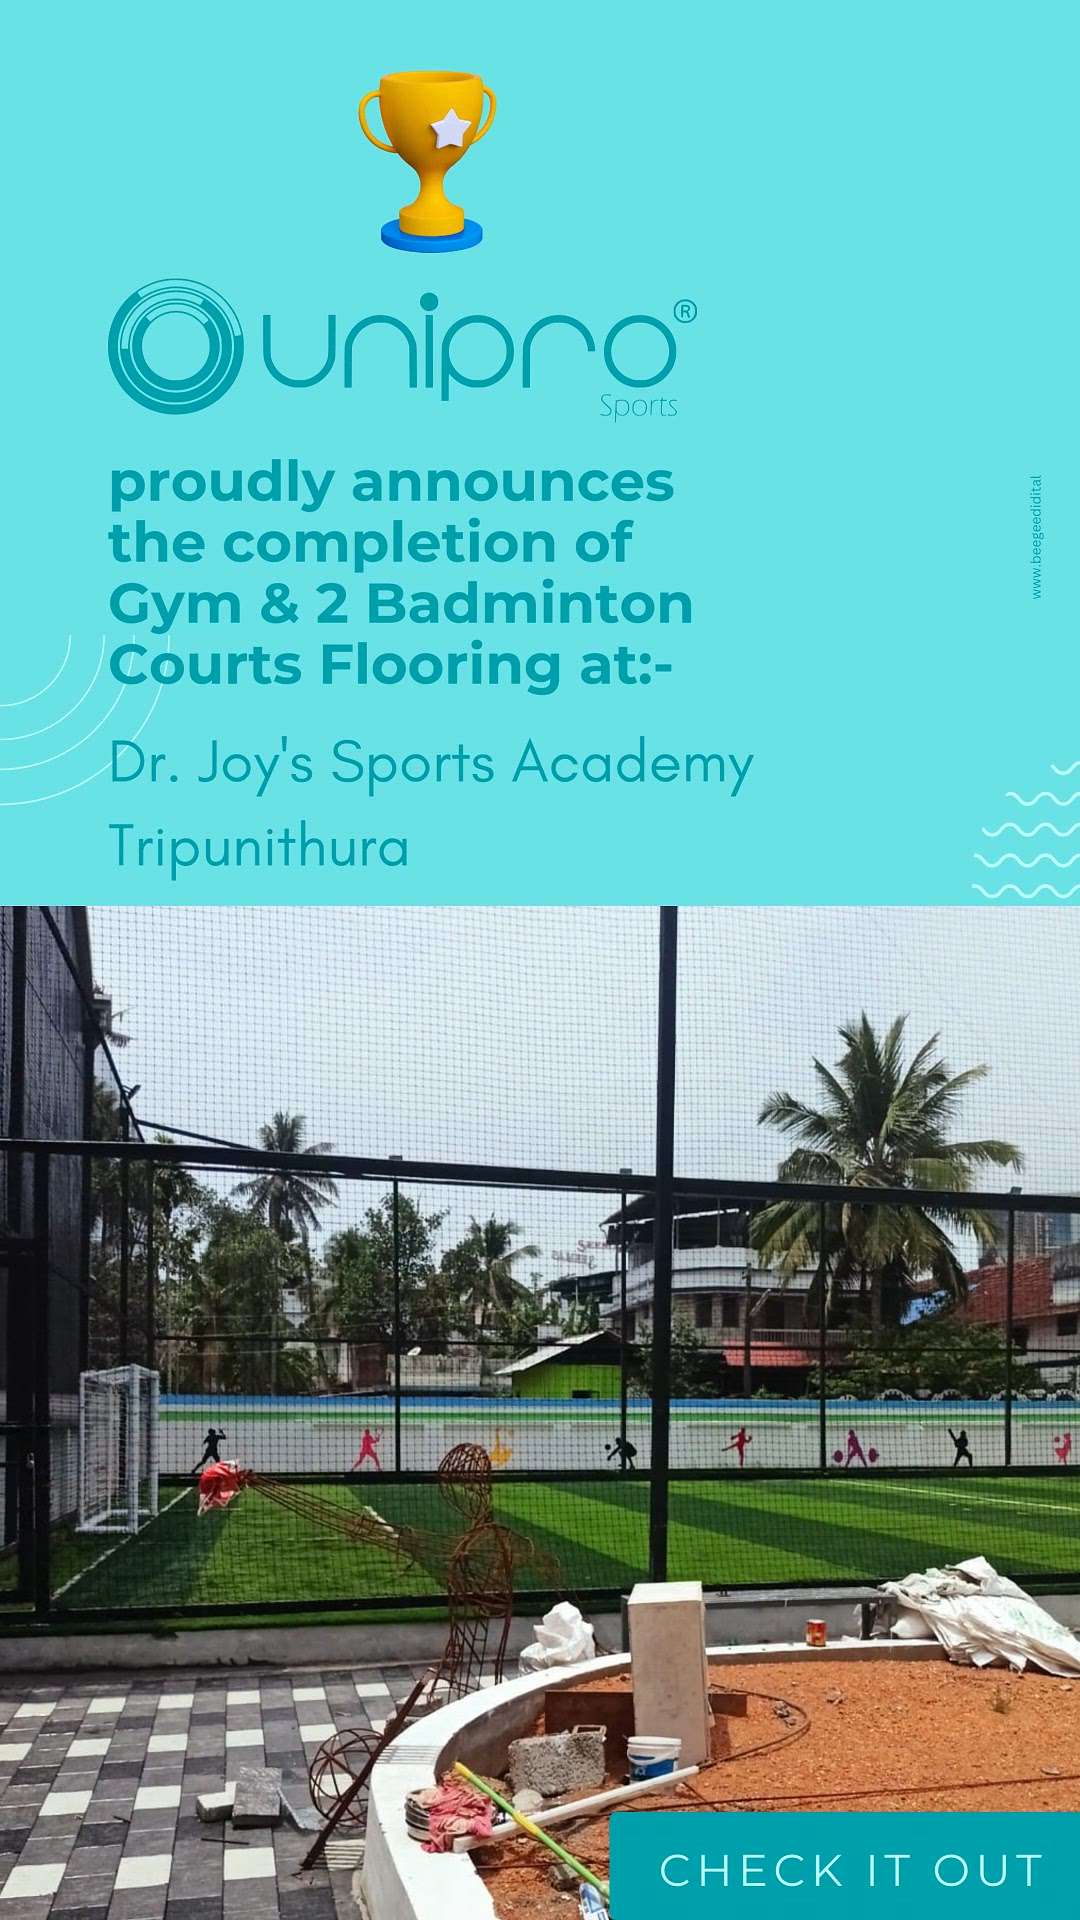 📢 Exciting Announcement! 🎉 We are thrilled to share the completion of our brand new Gym and 2 Badminton Court Flooring! 🏋️‍♀️🏸at Dr. Joy's Sports Academy, Tripunithura, Kochi.

✅ BWF Approved: Our state-of-the-art flooring boasts a 6.5mm thickness of sports-grade vinyl, ensuring a top-notch playing experience for all athletes. 🏅

✅ XCS Technology: With an Extremely Dense Cellular Structure, our flooring guarantees excellent recovery, giving you the perfect bounce and support during intense games. 🏓

✅ Double Foam Backed: Say goodbye to discomfort! Our flooring provides double foam backing for superior cushioning and shock absorption, reducing the risk of injuries. 💪

✅ Exceptional Wear Resistance: Our flooring is built to last, thanks to its wear layer that offers exceptional resistance to scratches. ⚡️

✅ Easy Maintenance

Want to know more? Call us:
 wa.me/919544308555
www.uniprogroup.in
t.me/uniprogrp
 #badmintoncourt #sportsflooring  #uniprogrp  #unipro